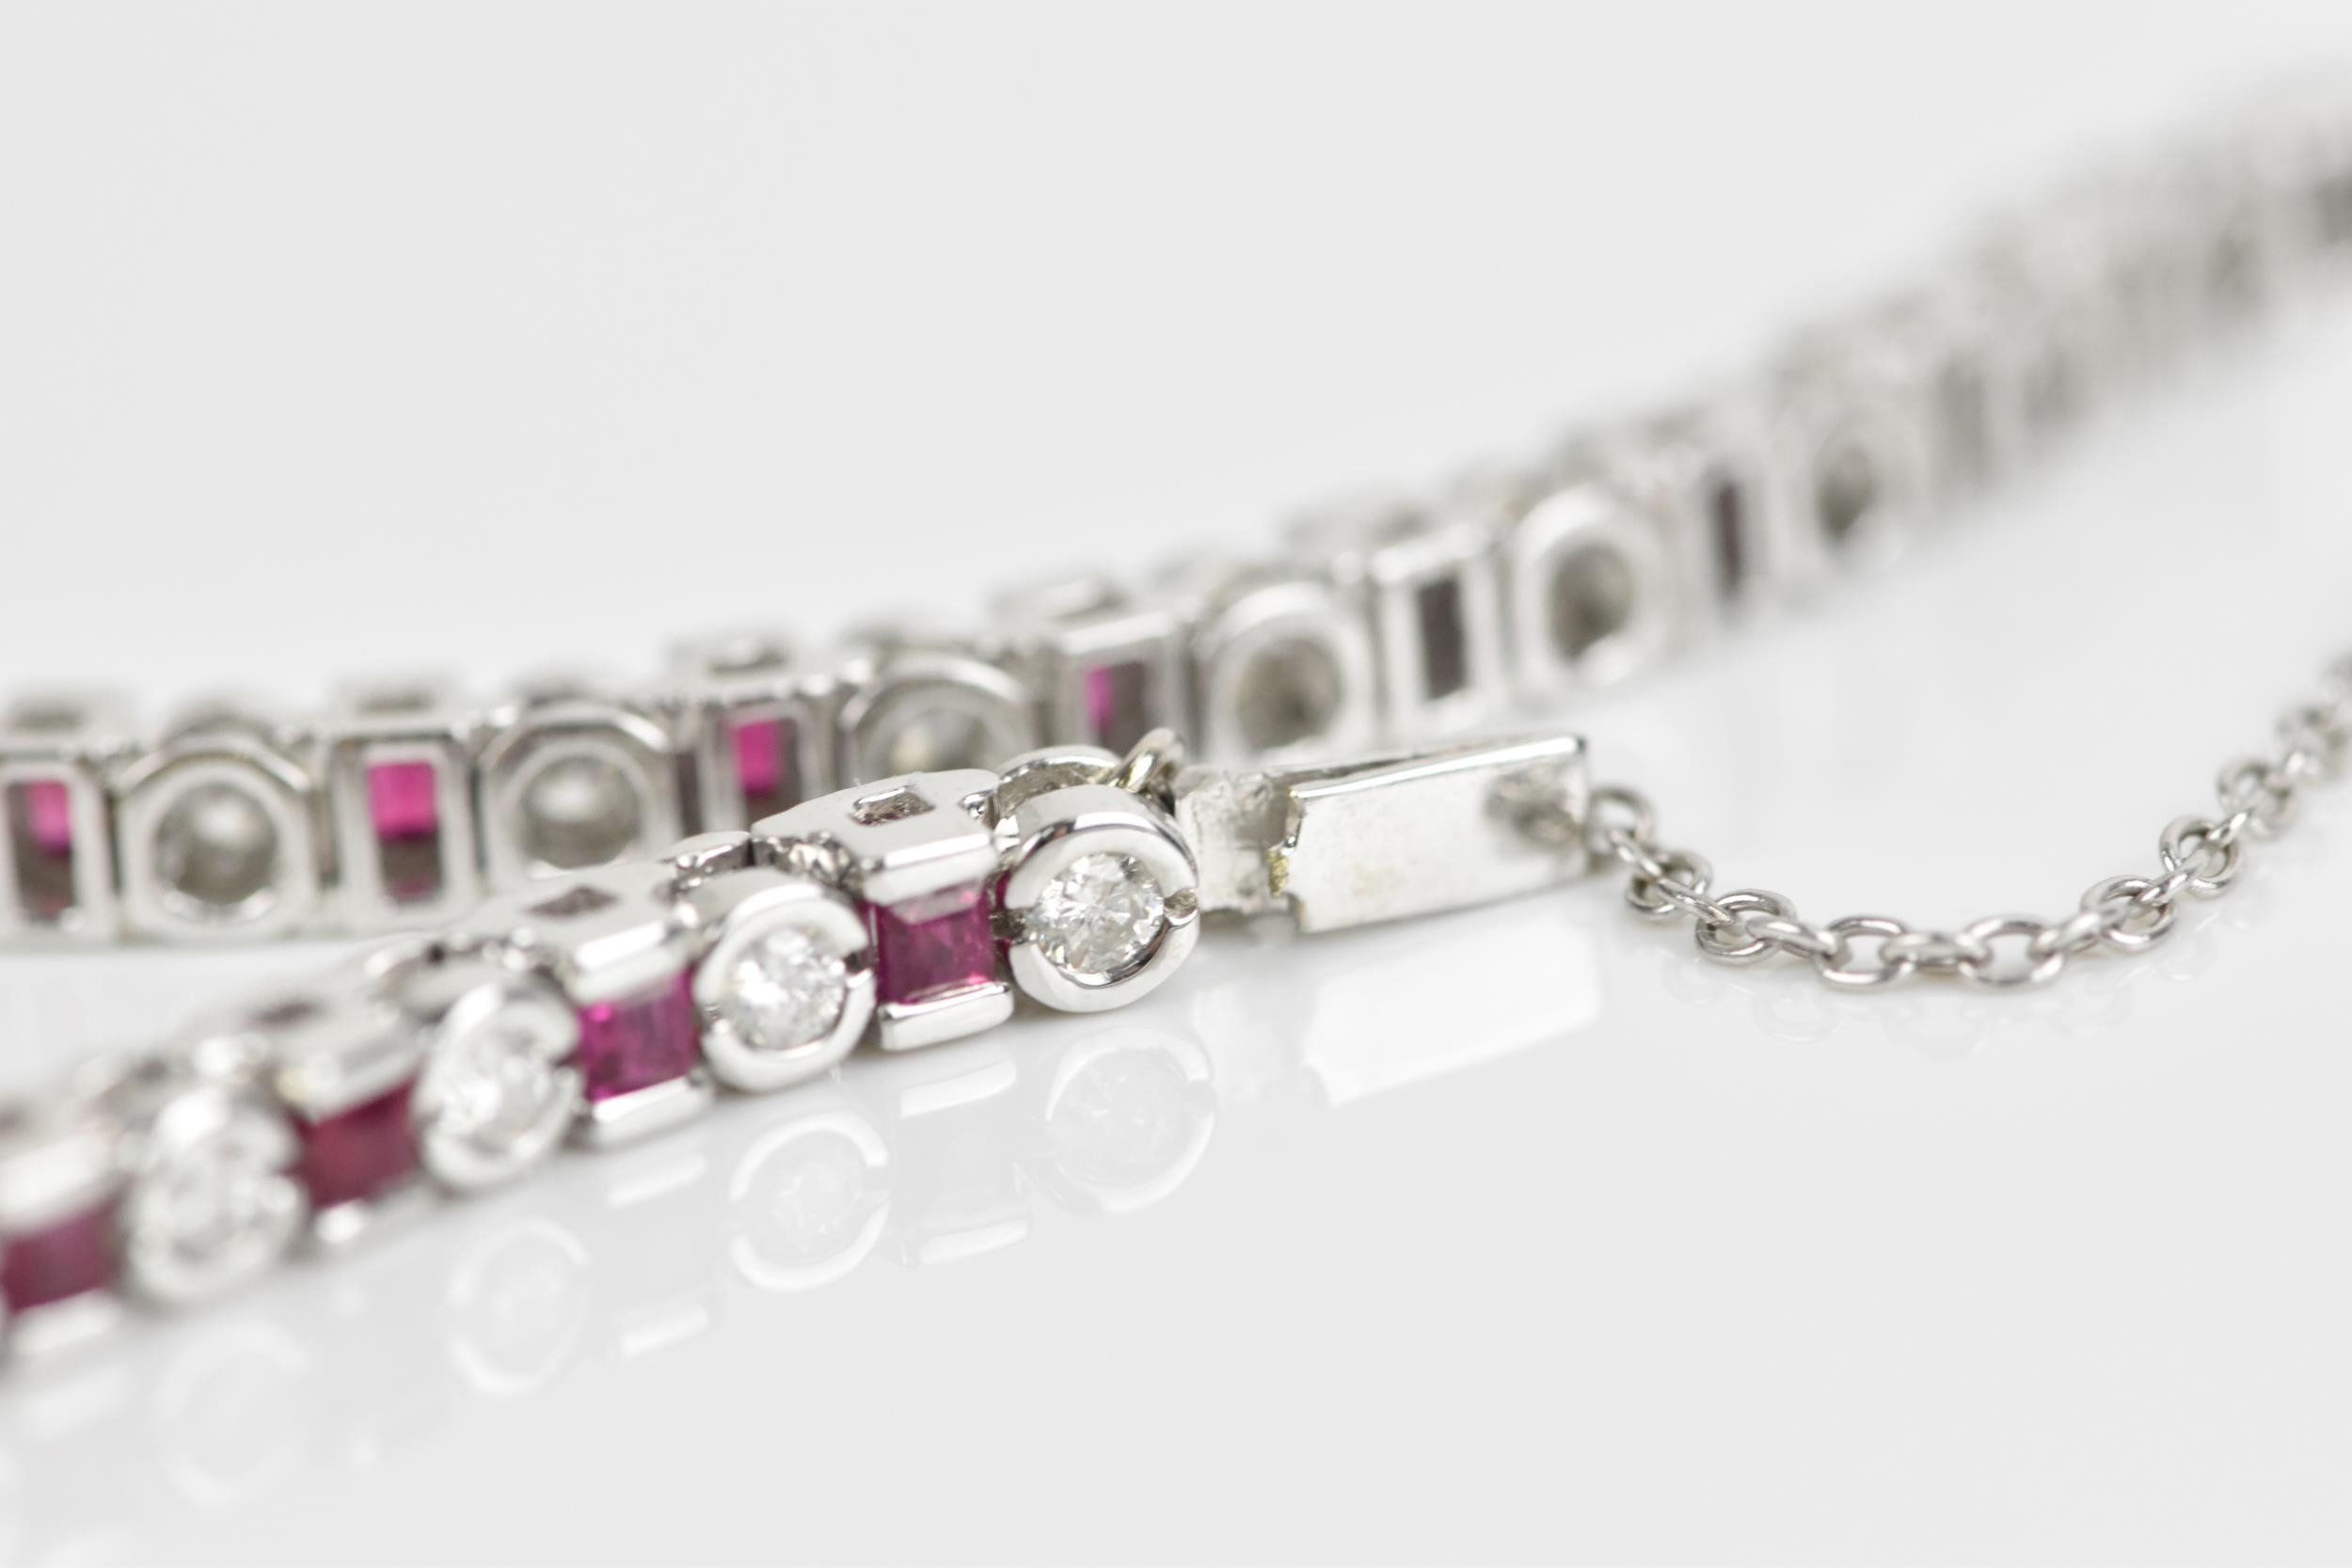 An 18ct white gold, diamond and ruby bracelet, with alternating round brilliant cut diamond and - Image 6 of 8